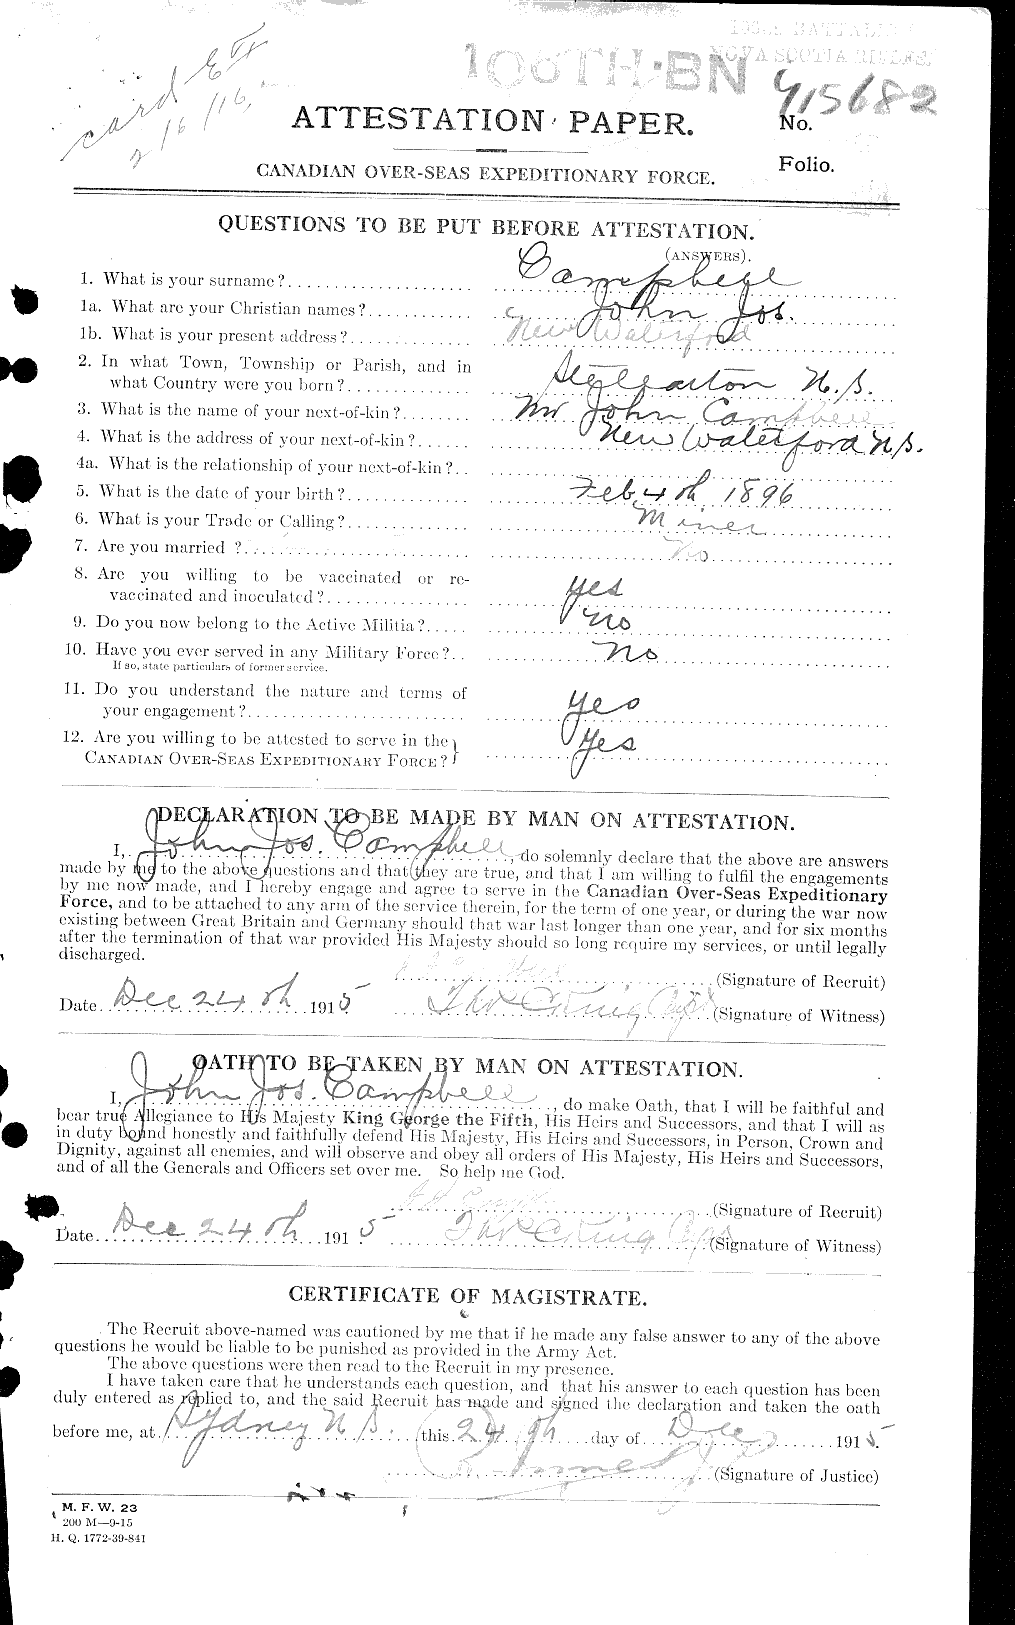 Personnel Records of the First World War - CEF 008551a